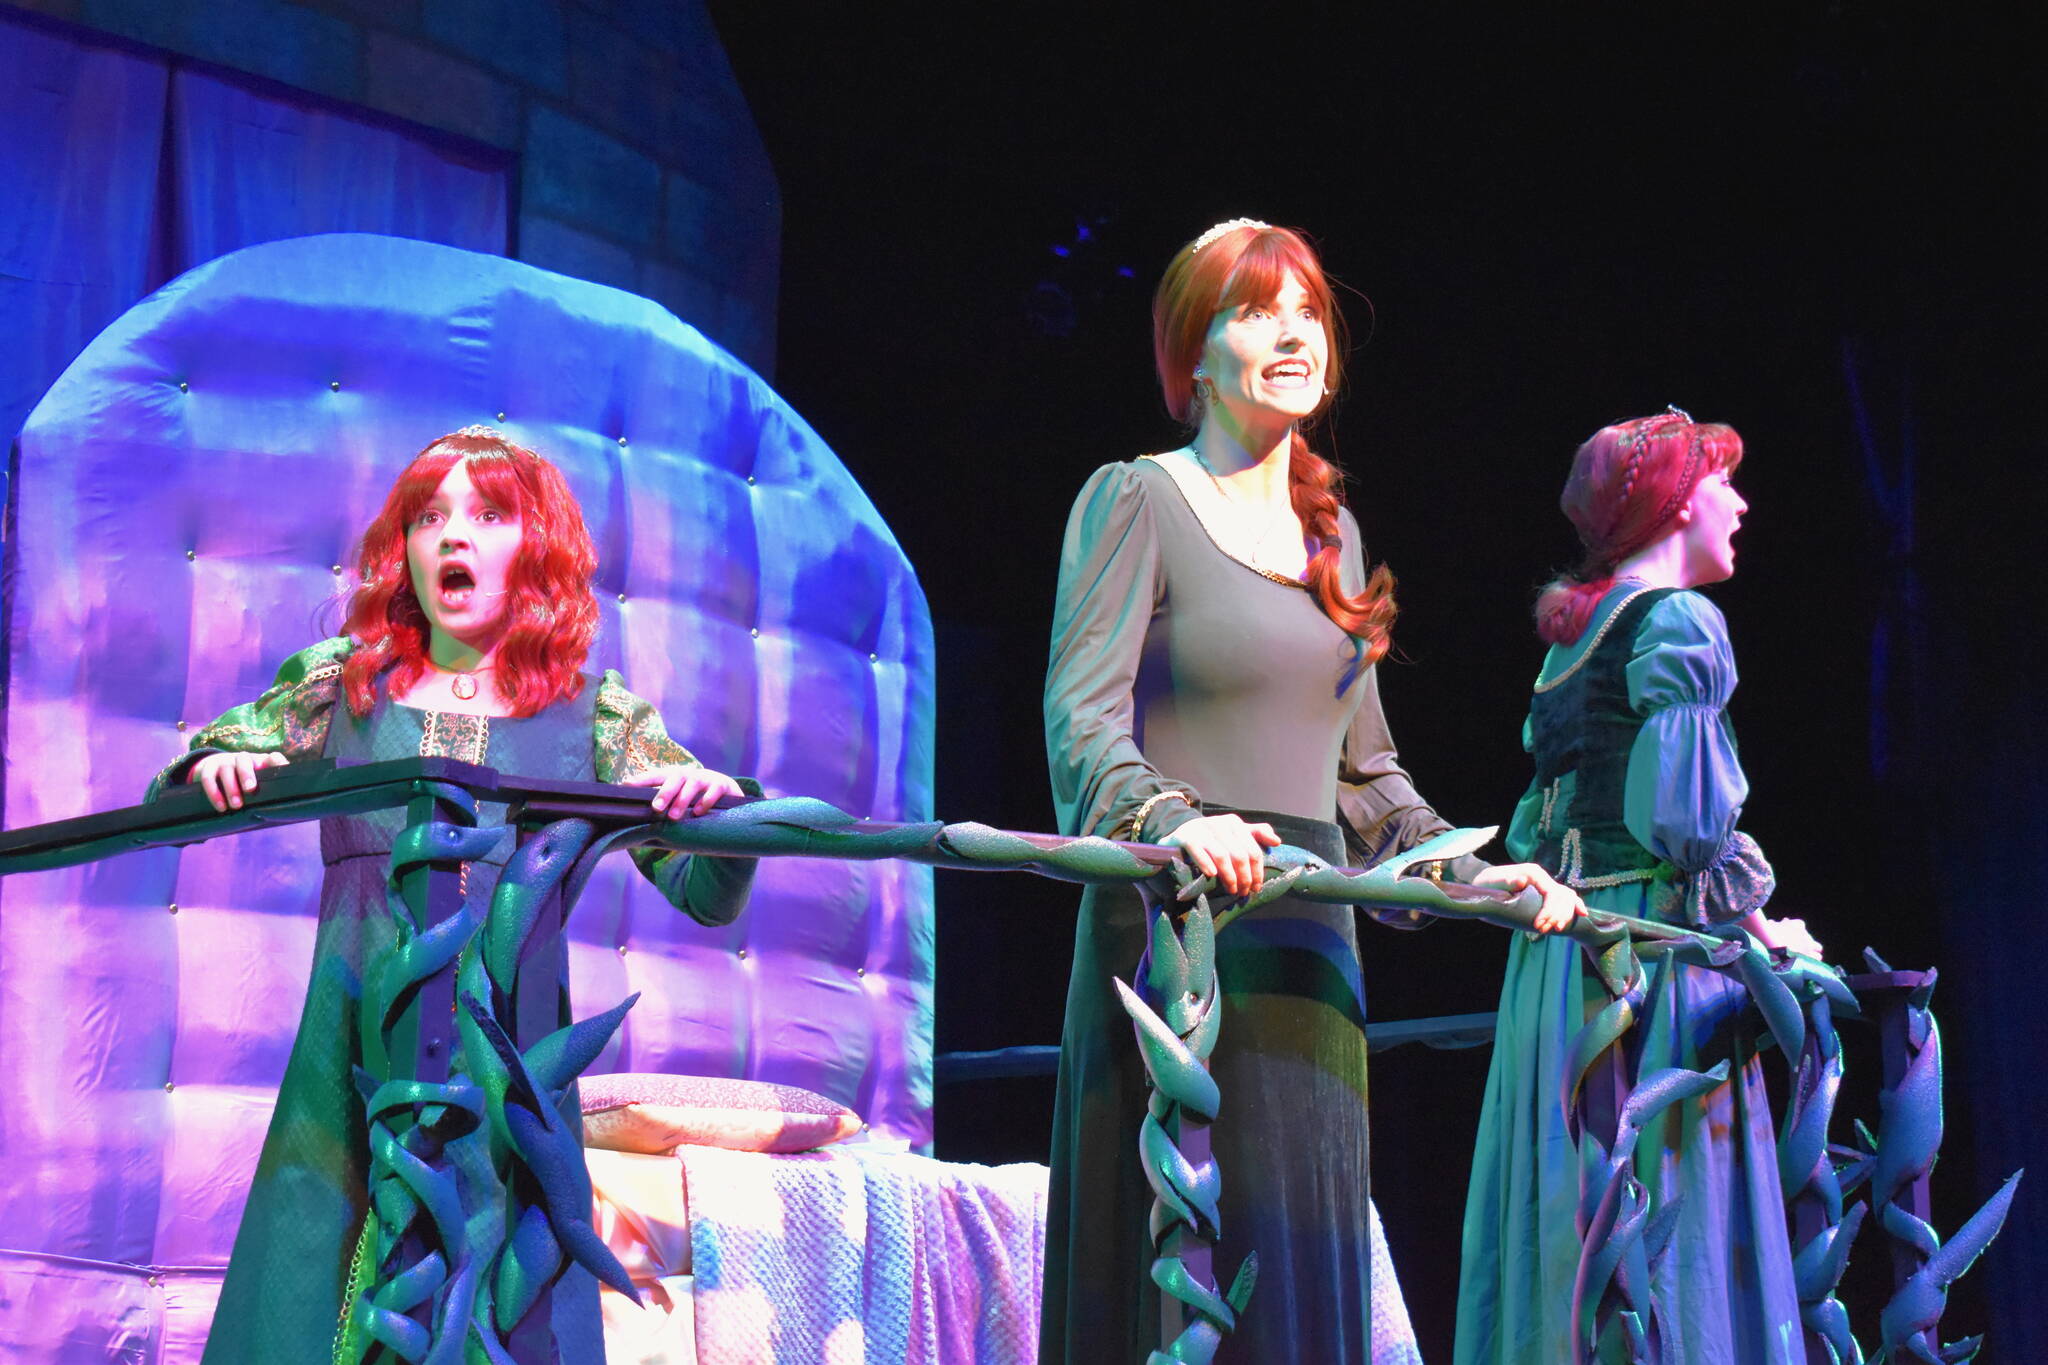 Kelley Balcomb-Bartok / Staff photo
From left, Madeline Rose, Erin Wygant, and Shelby Mullen represent the three stages of fairytale Princess Fiona's life, as they collectively pine to be freed from the castle they've been imprisoned for years.